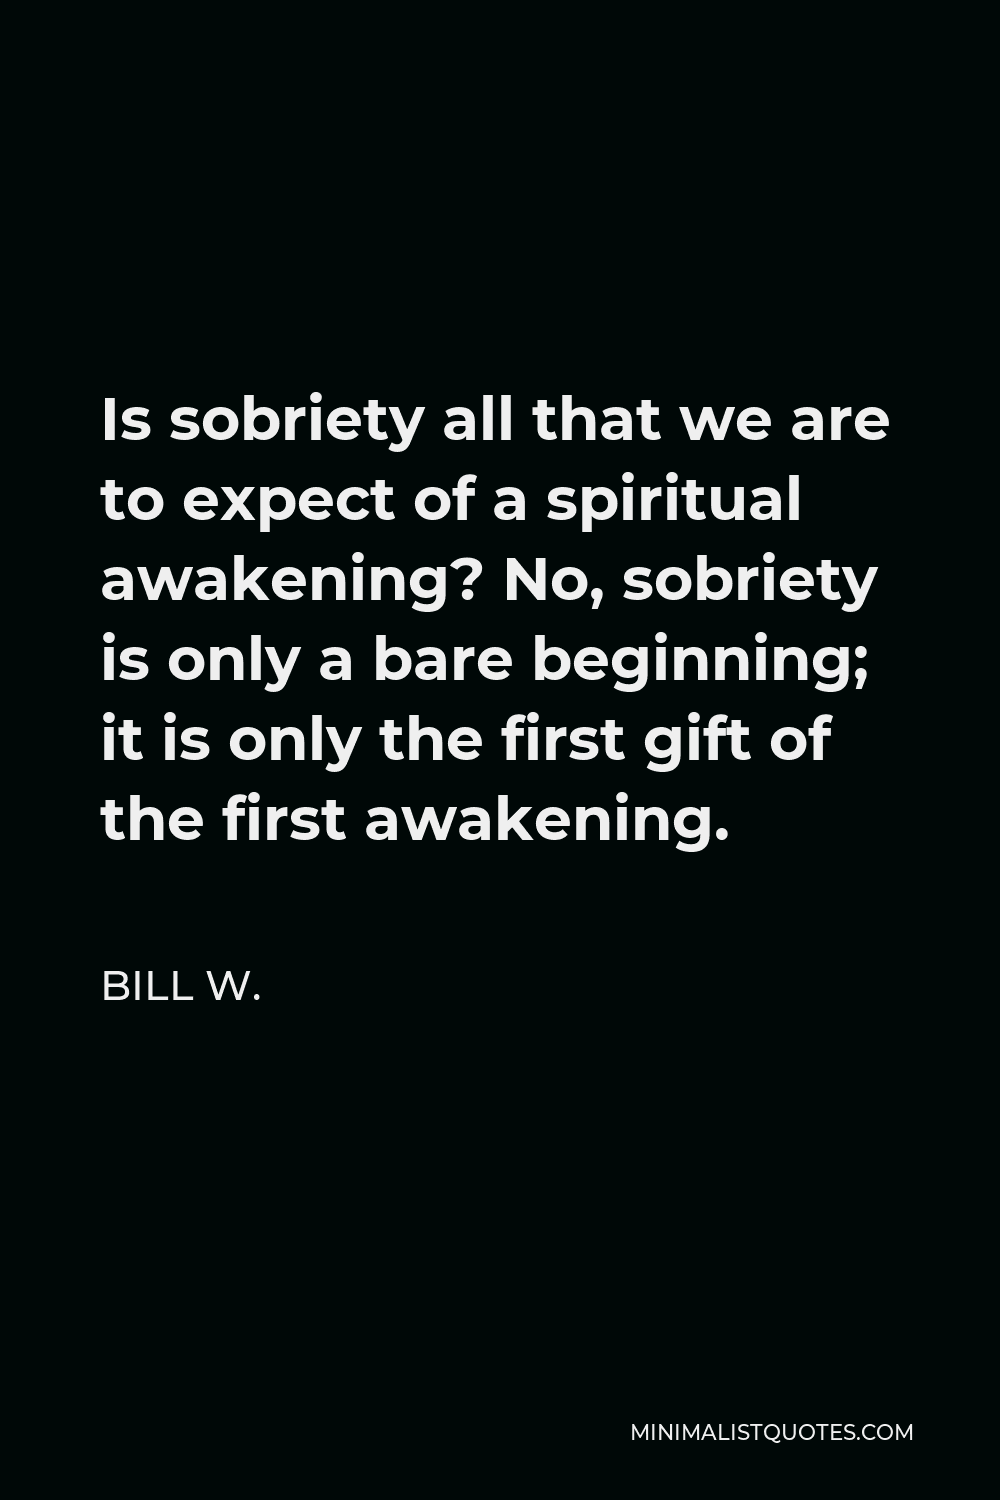 Bill W. Quote - Is sobriety all that we are to expect of a spiritual awakening? No, sobriety is only a bare beginning; it is only the first gift of the first awakening.